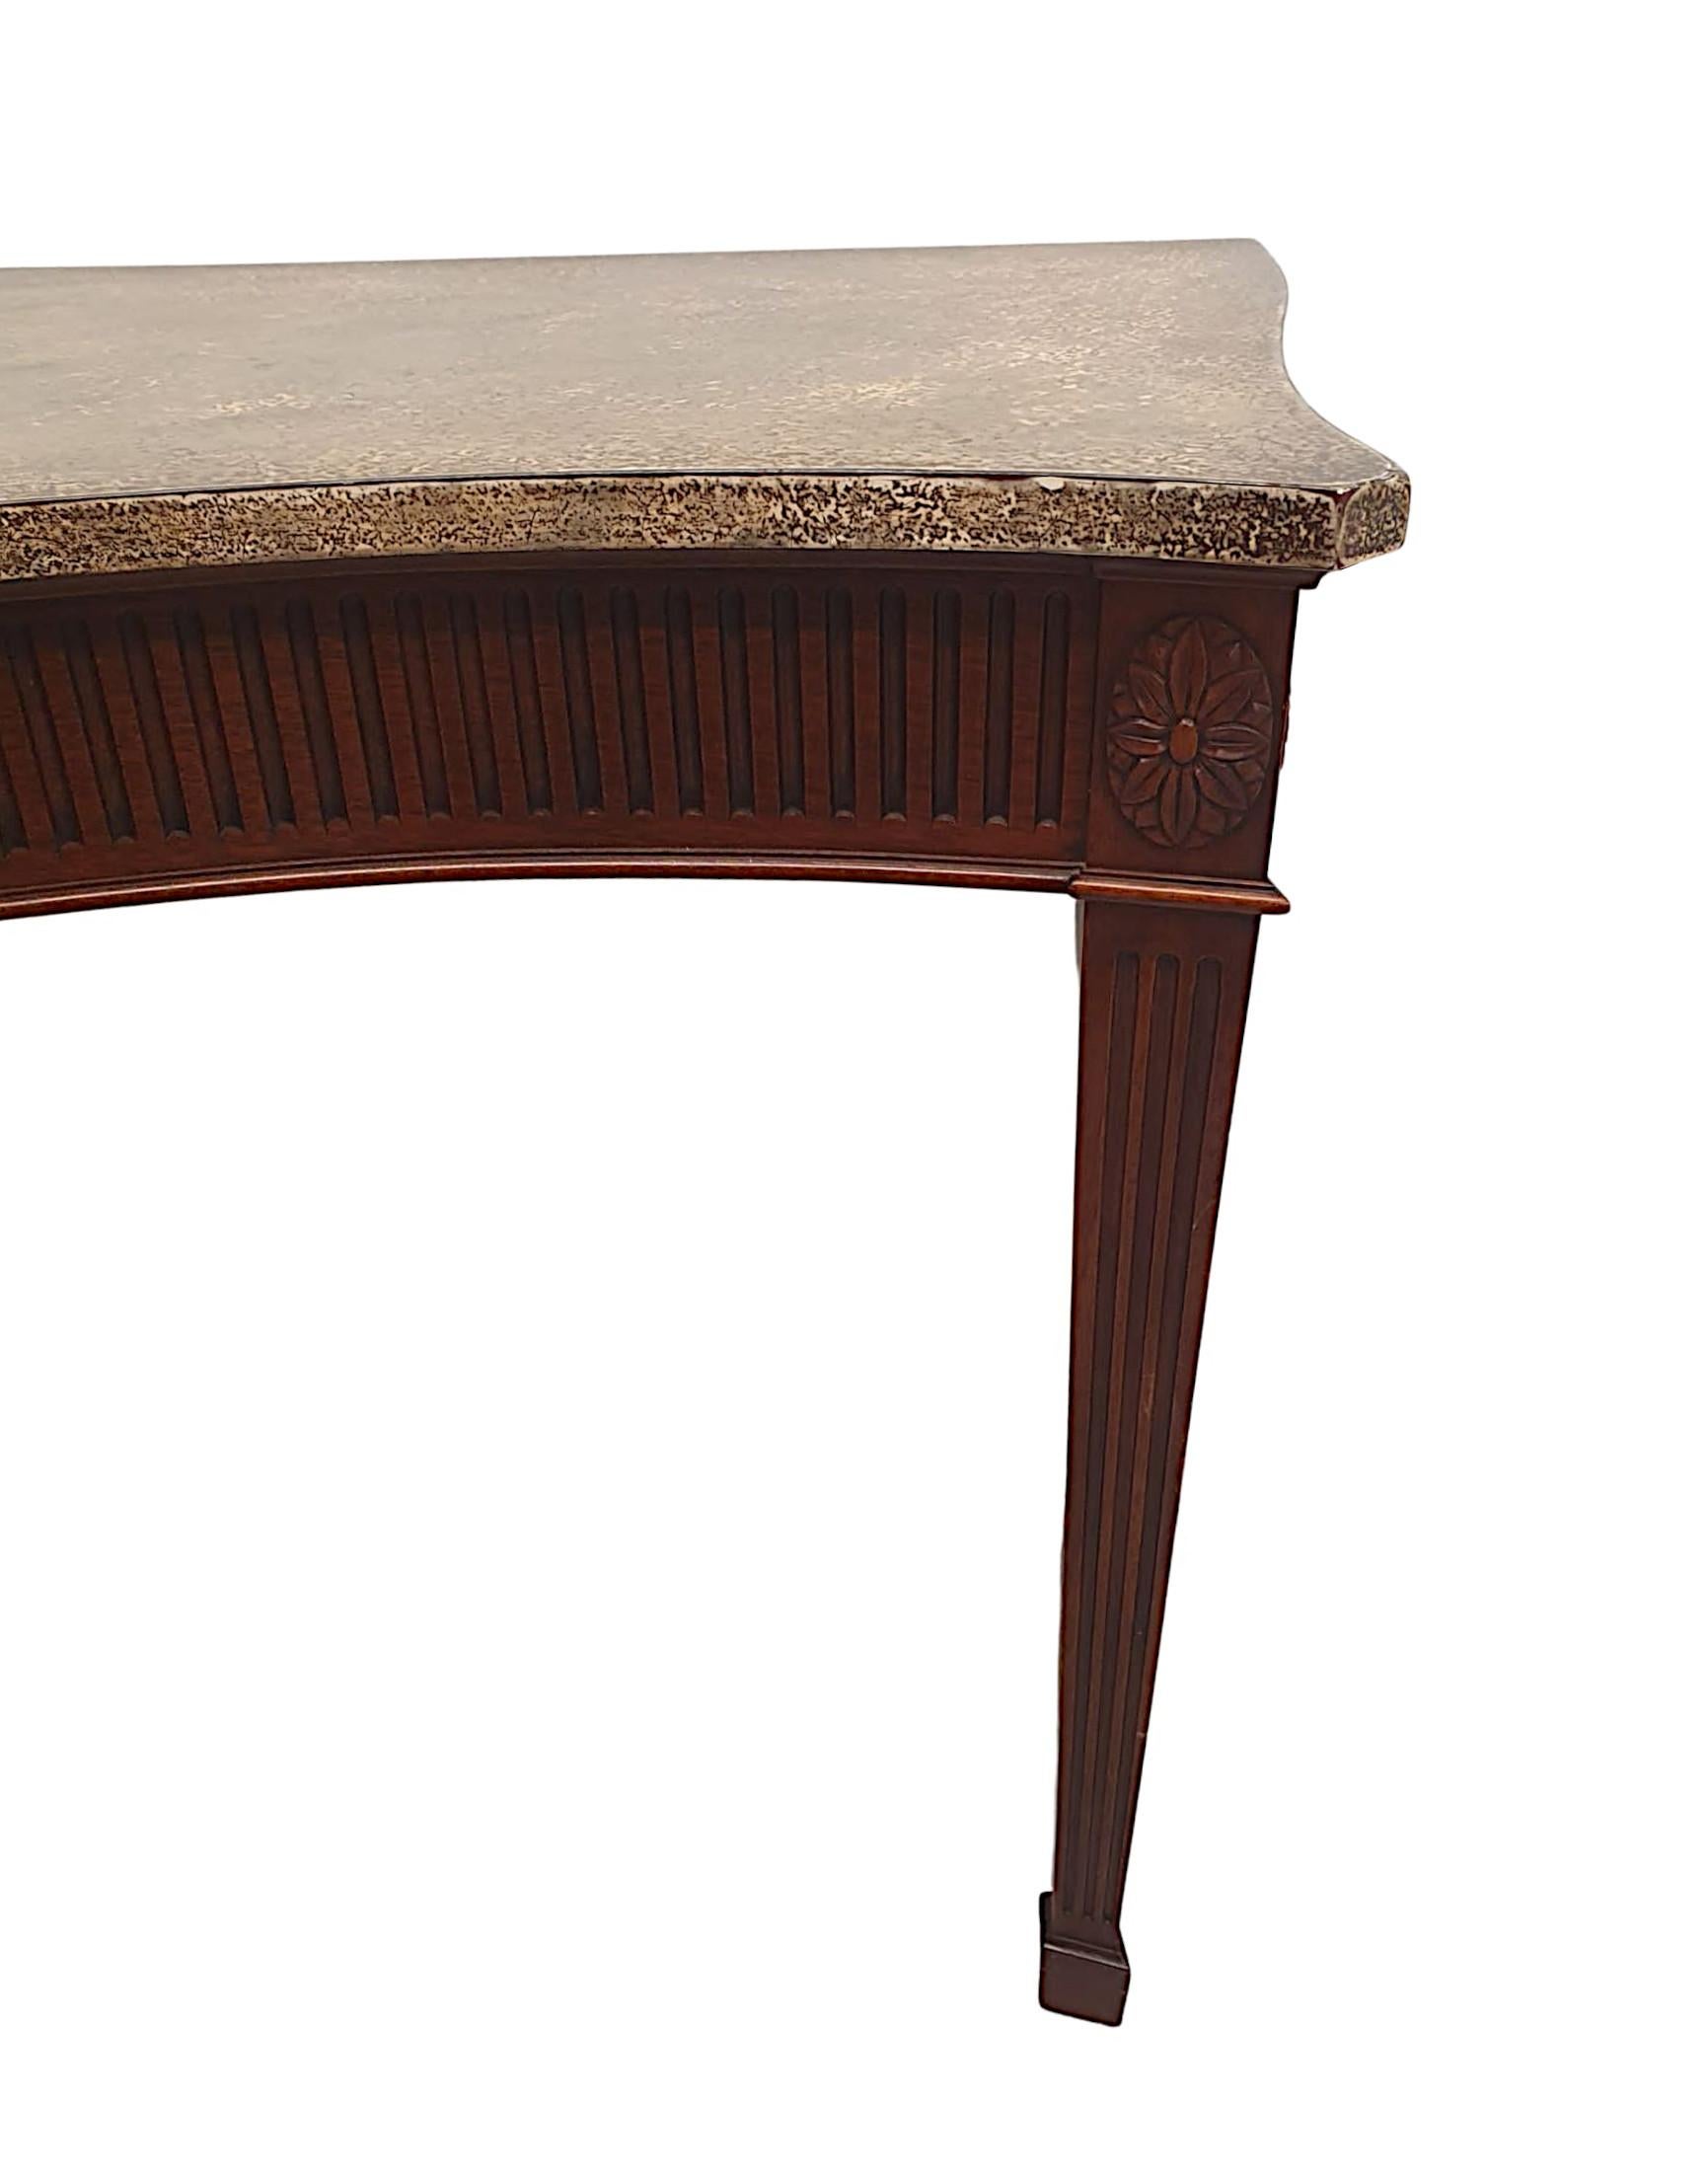 English A Very Fine 20th Century Adams Design Console or Hall Table For Sale